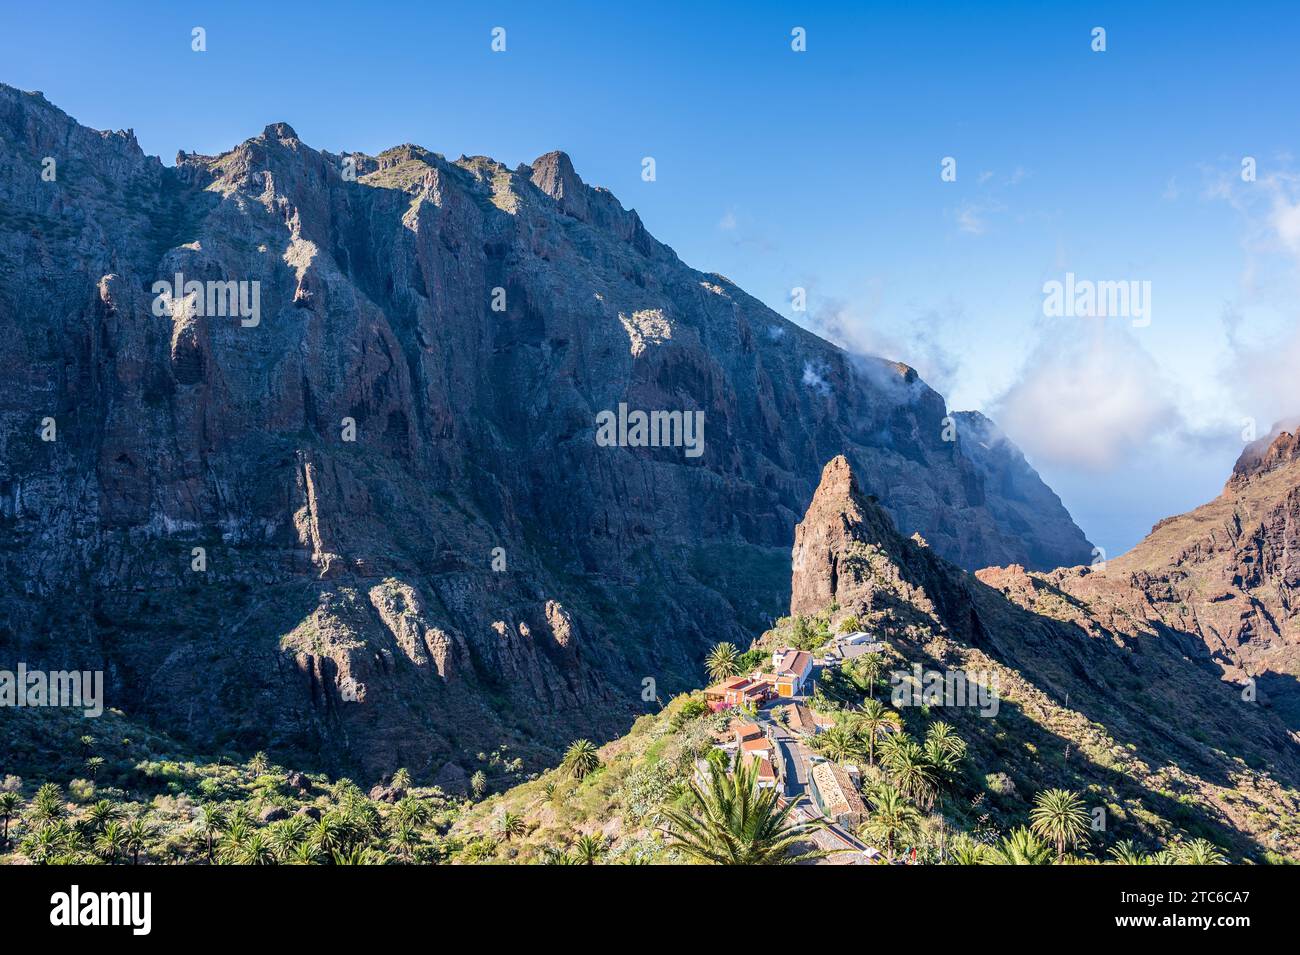 View of Masca, a small mountain village on the island of Tenerife, from above. The village is situated above the Los Gigantes cliffs, the highest clif Stock Photo